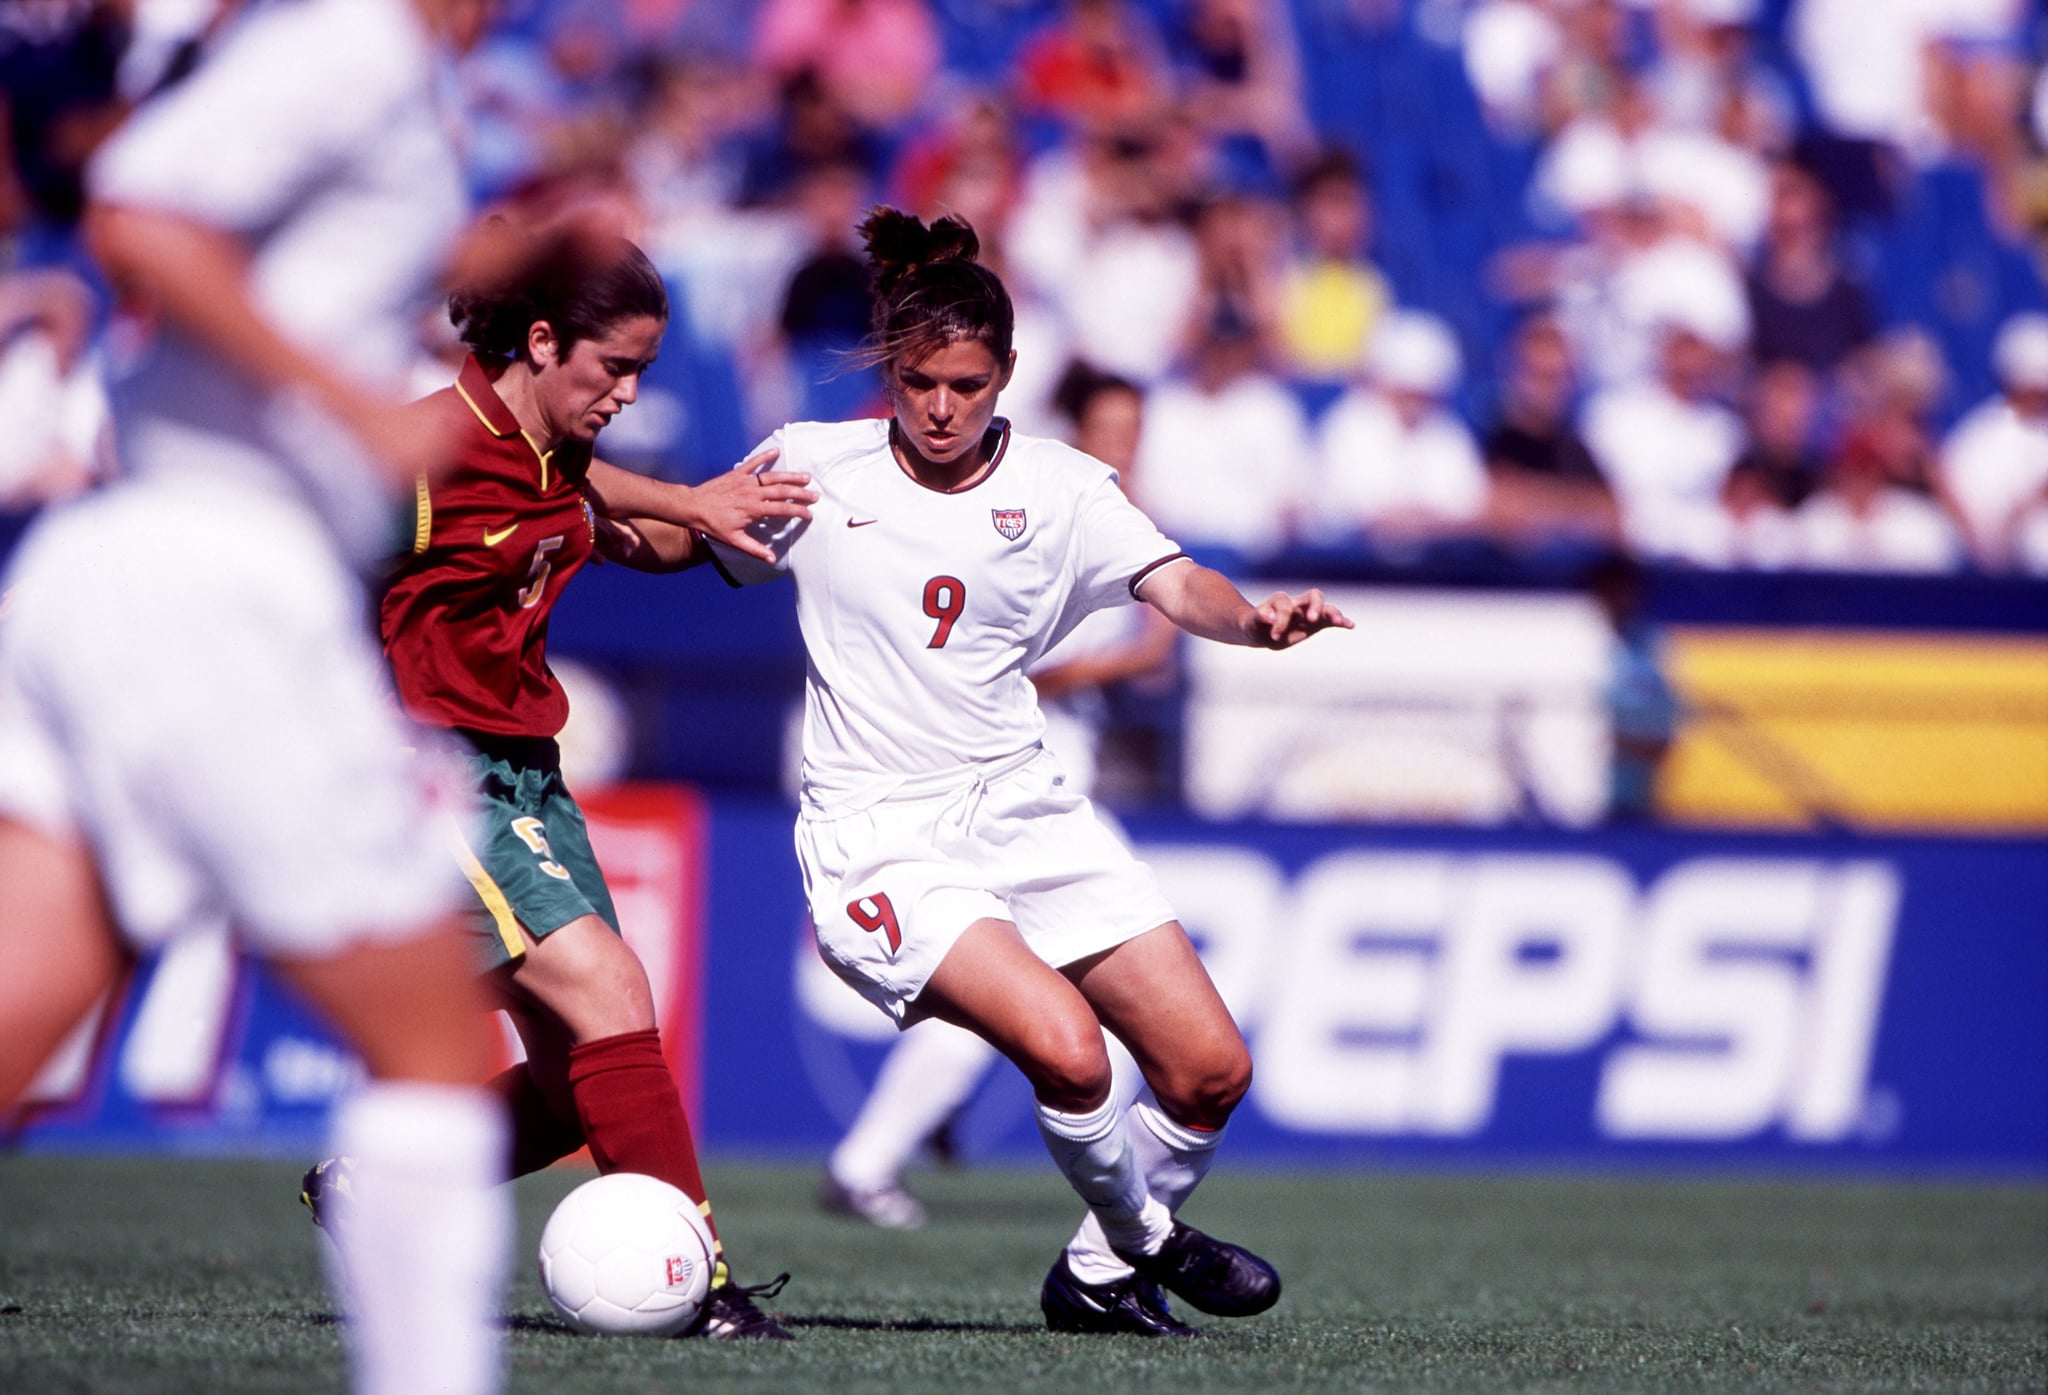 1999:  Mia Hamm #9 of the USA in action during the USA Women's Soccer team's game versus Portugal in Ft. Lauderdale, FL.  (Photo by John Biever/Icon Sportswire via Getty Images)